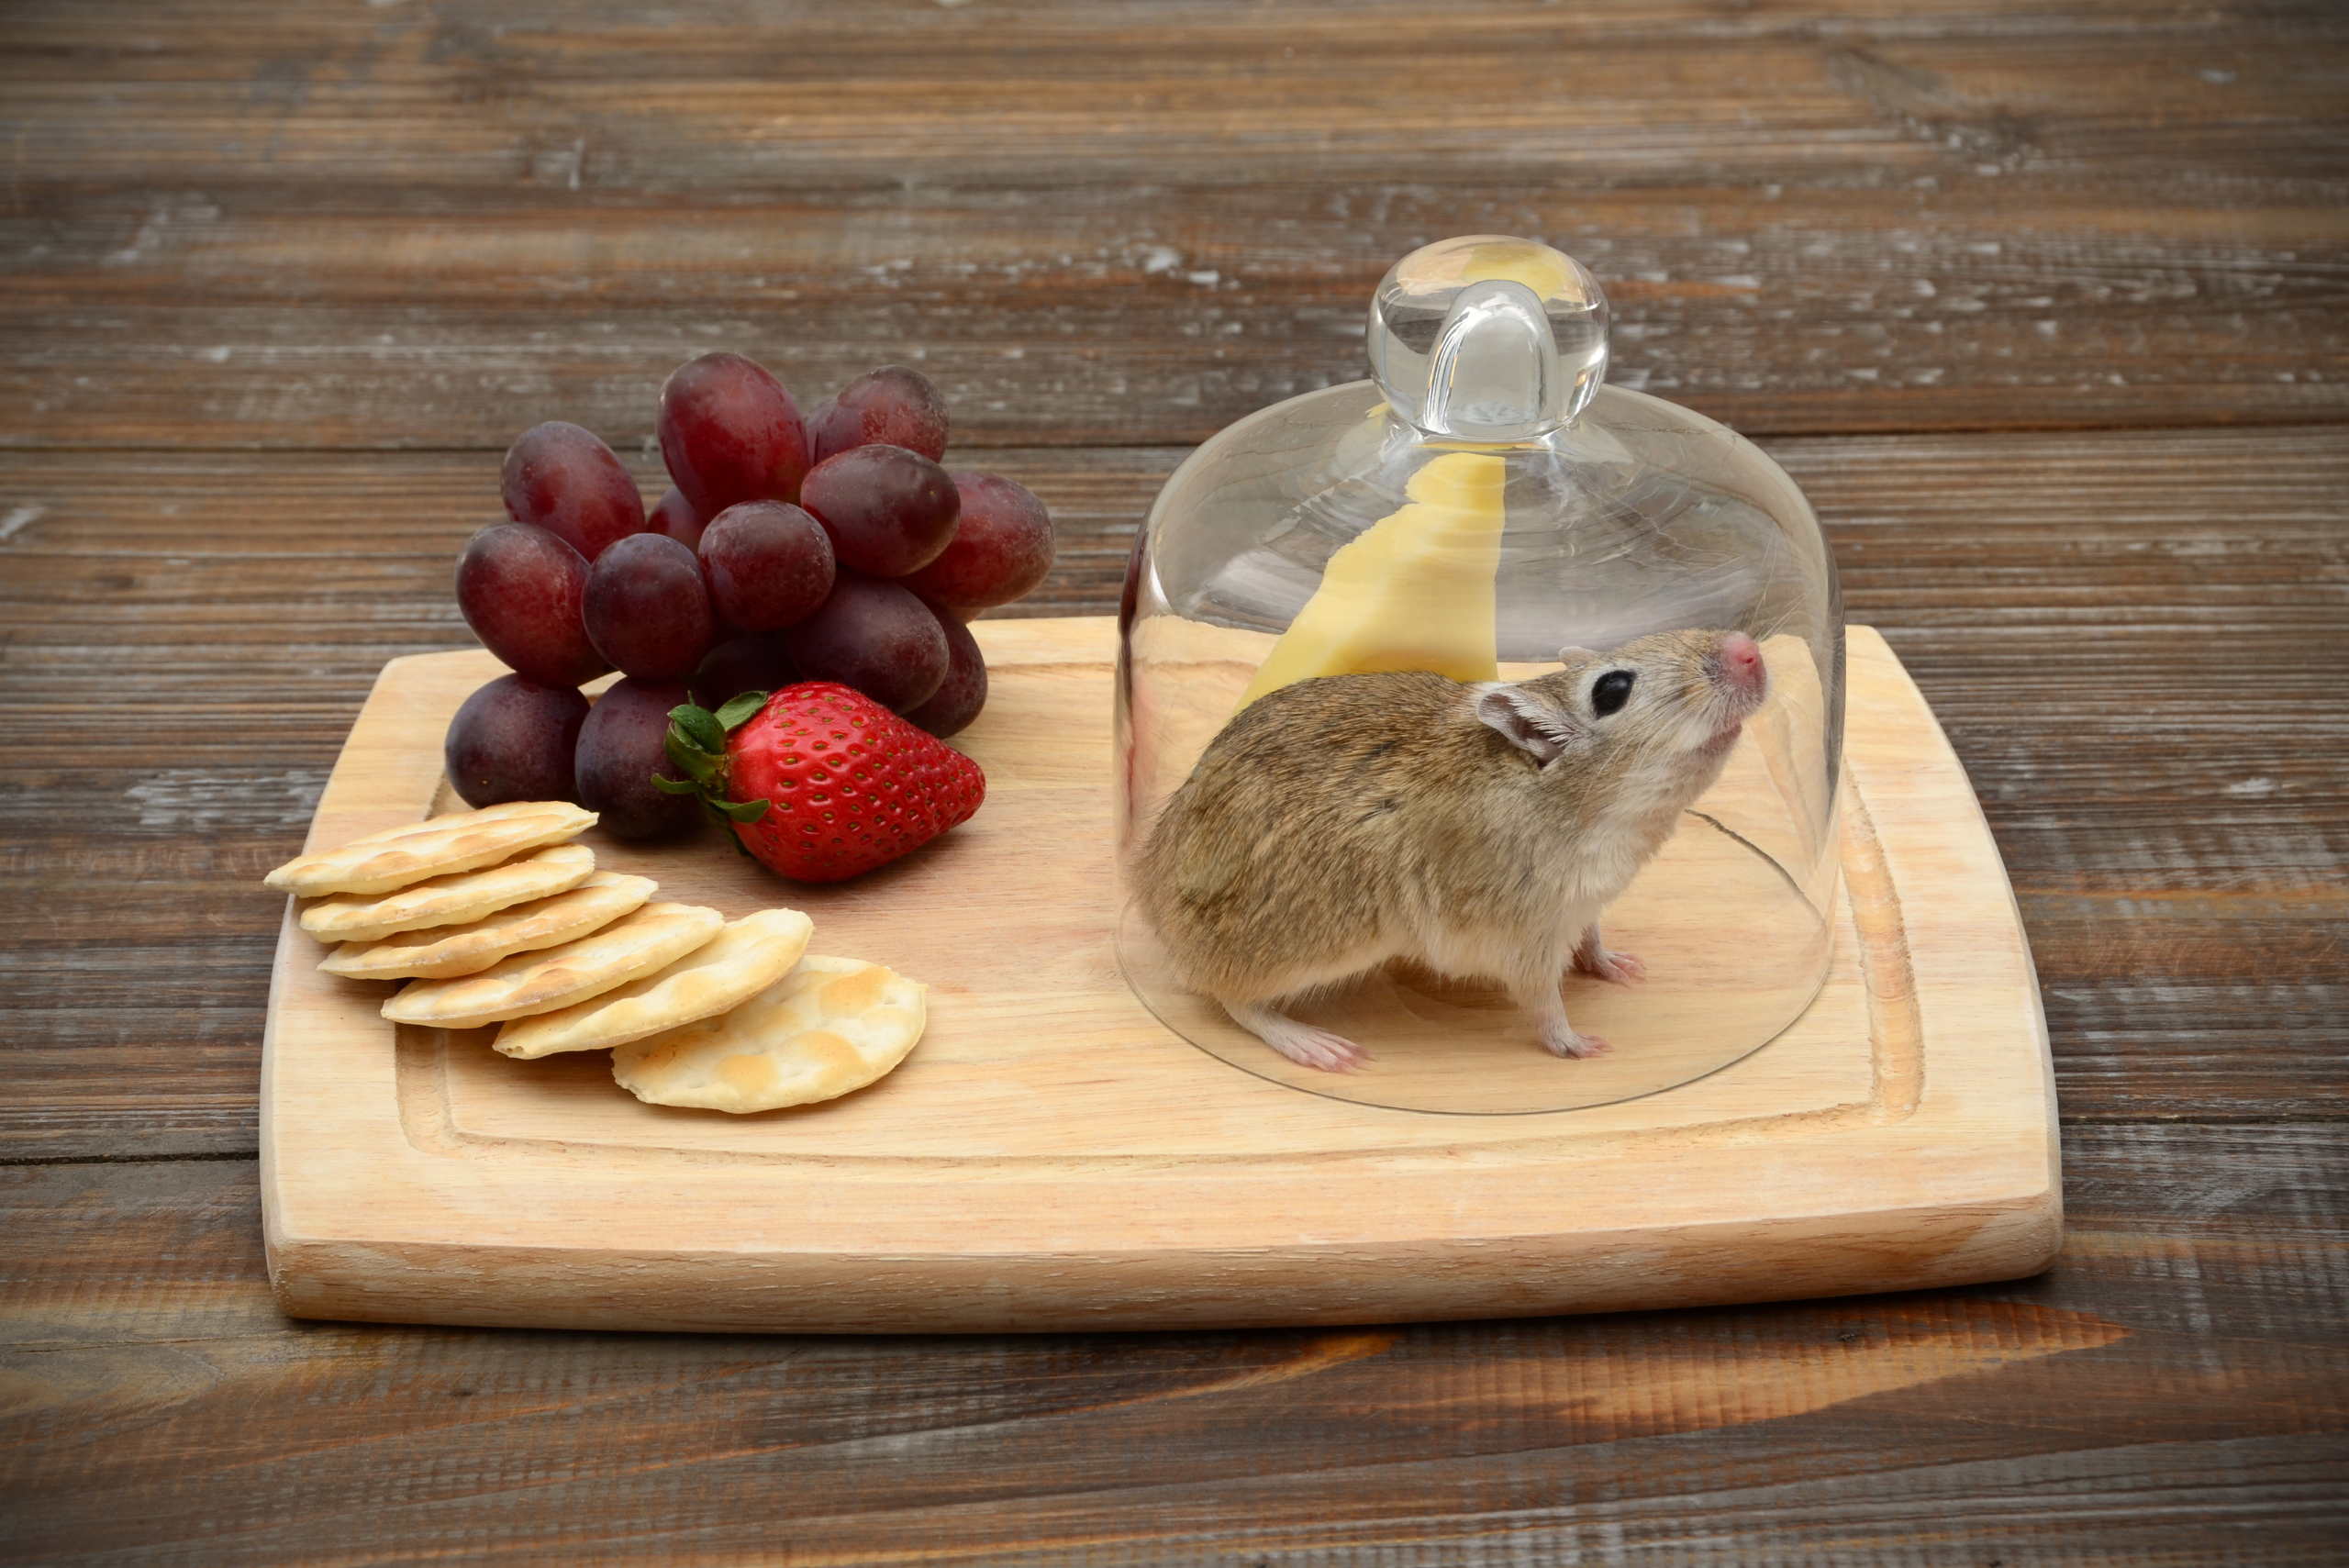 Cheese board with mouse trapped under glass container.